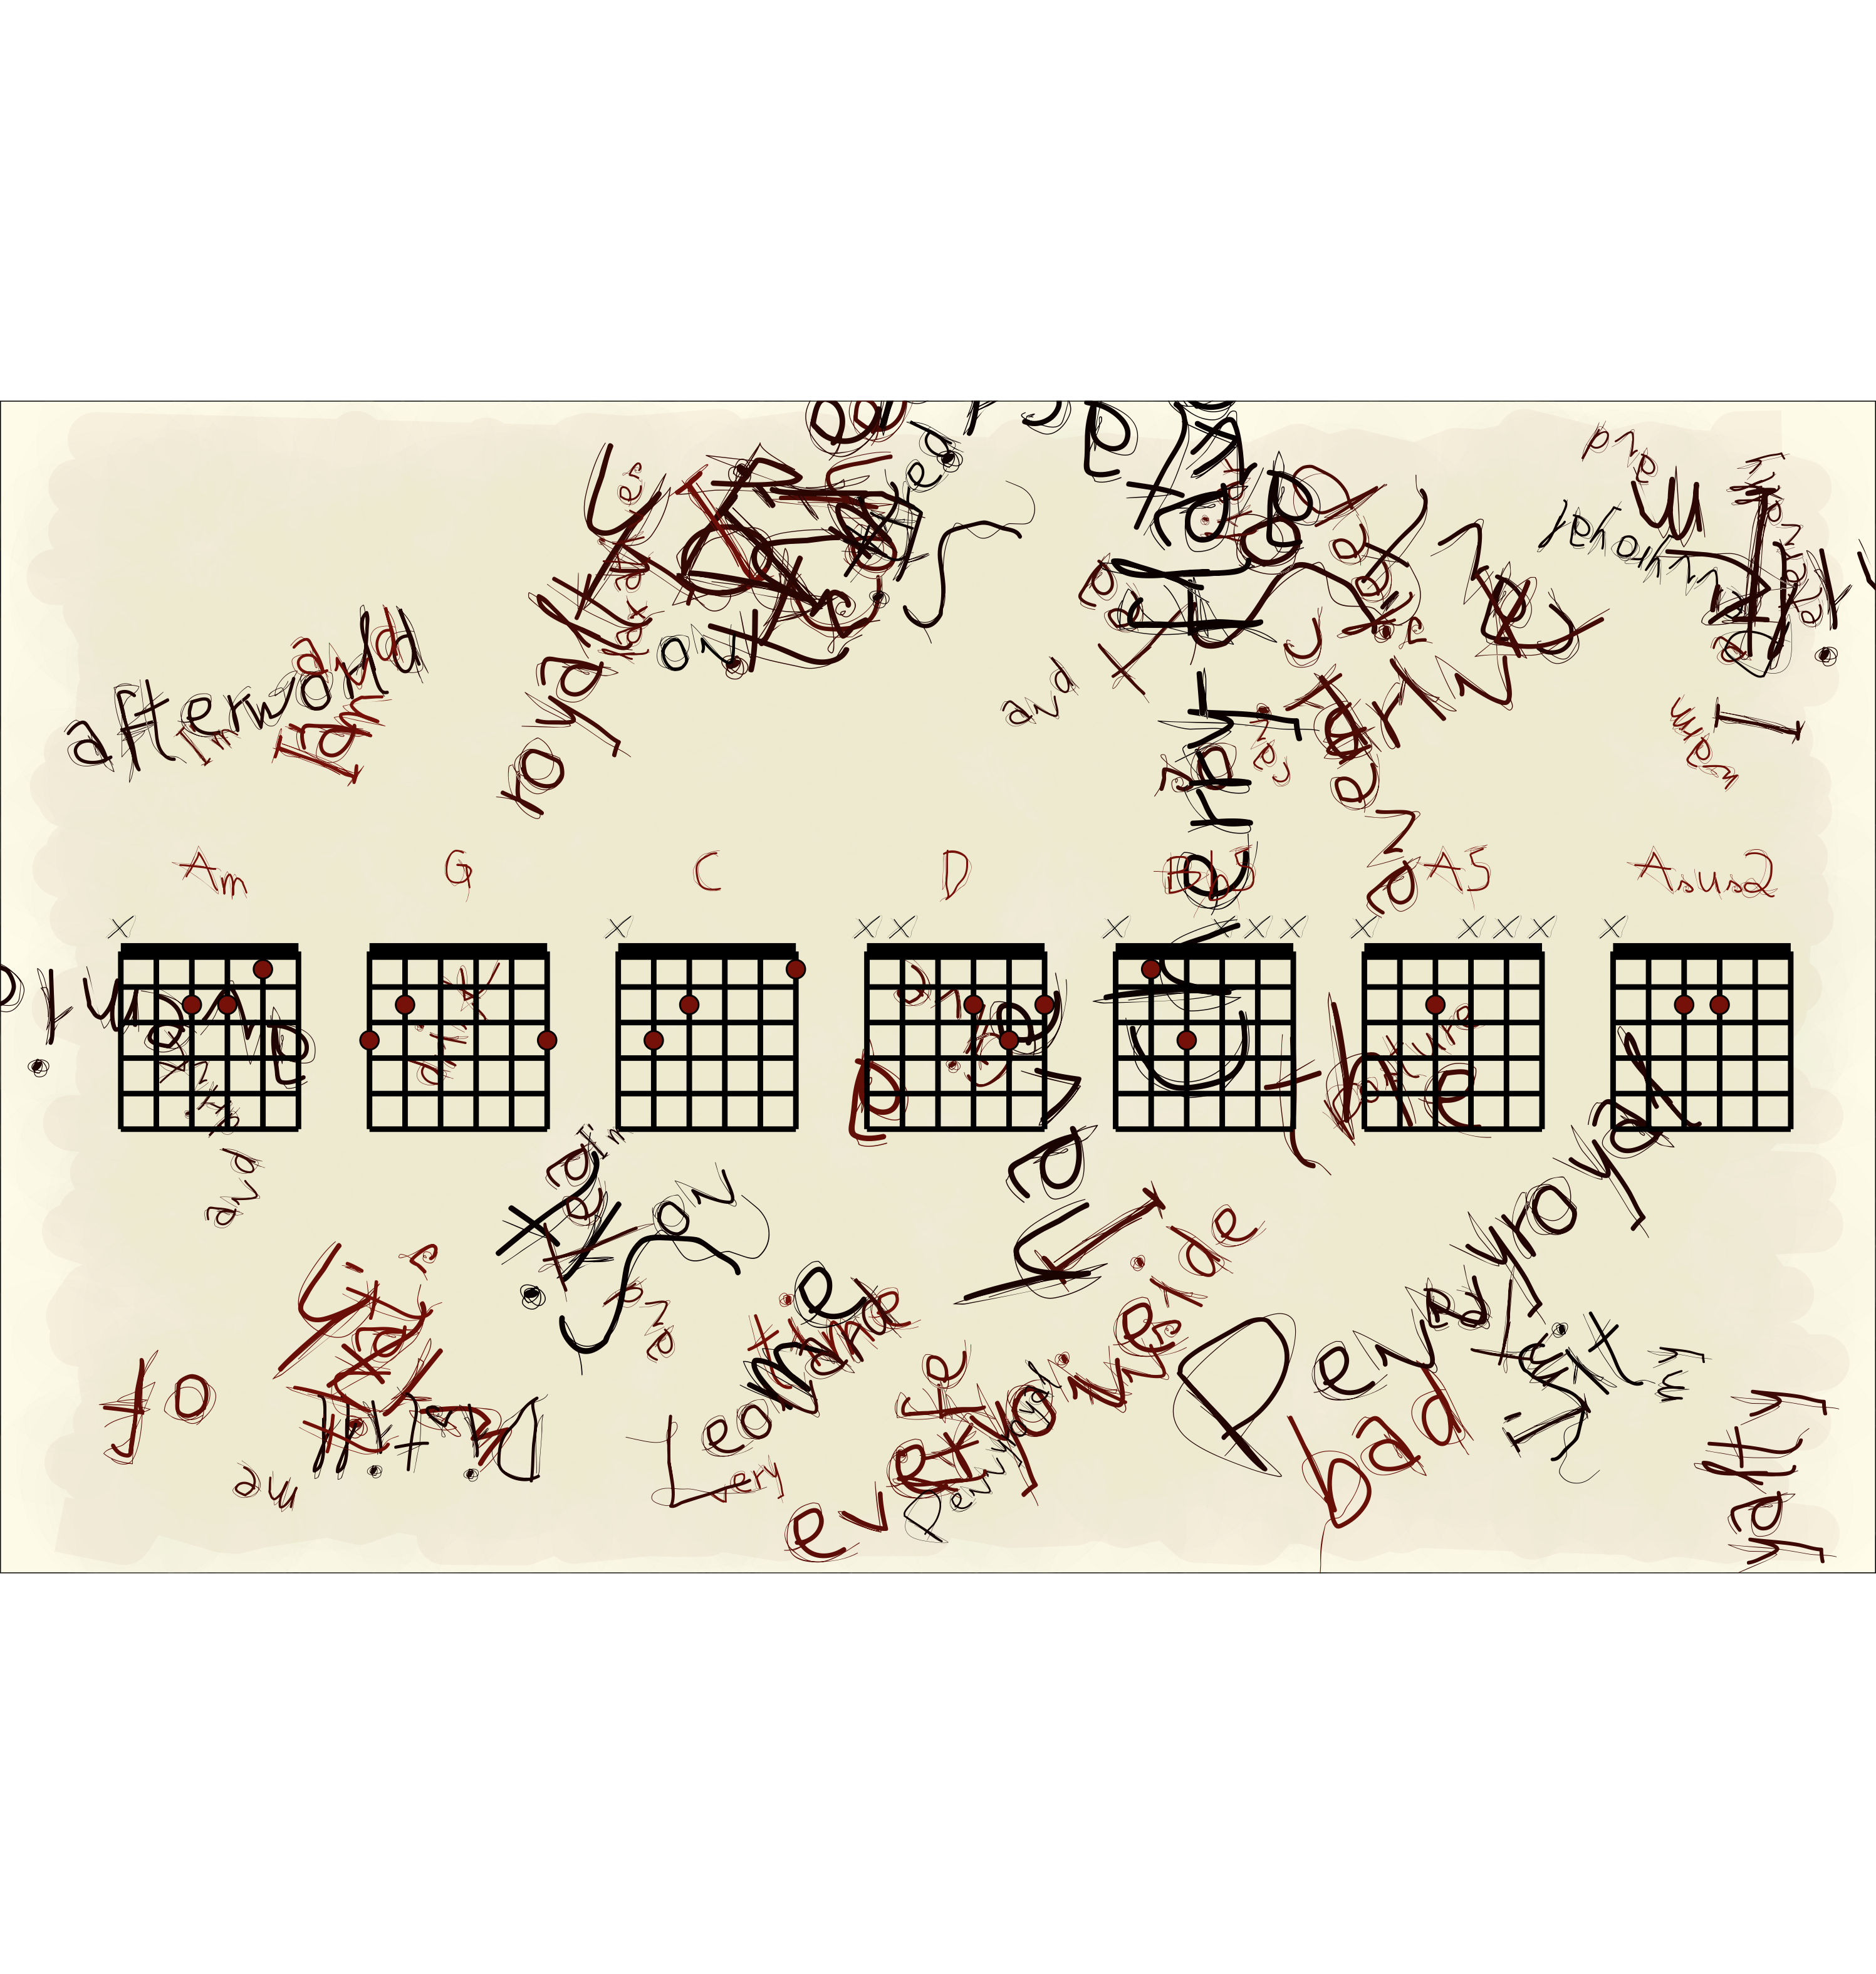 An image of the five guitar chords maps of the notes played in the Nirvana song, Pennyroyal Tea on a beige background. The lyrics to the song is randomly placed on the page at different positions and angles in a dark maroon font.